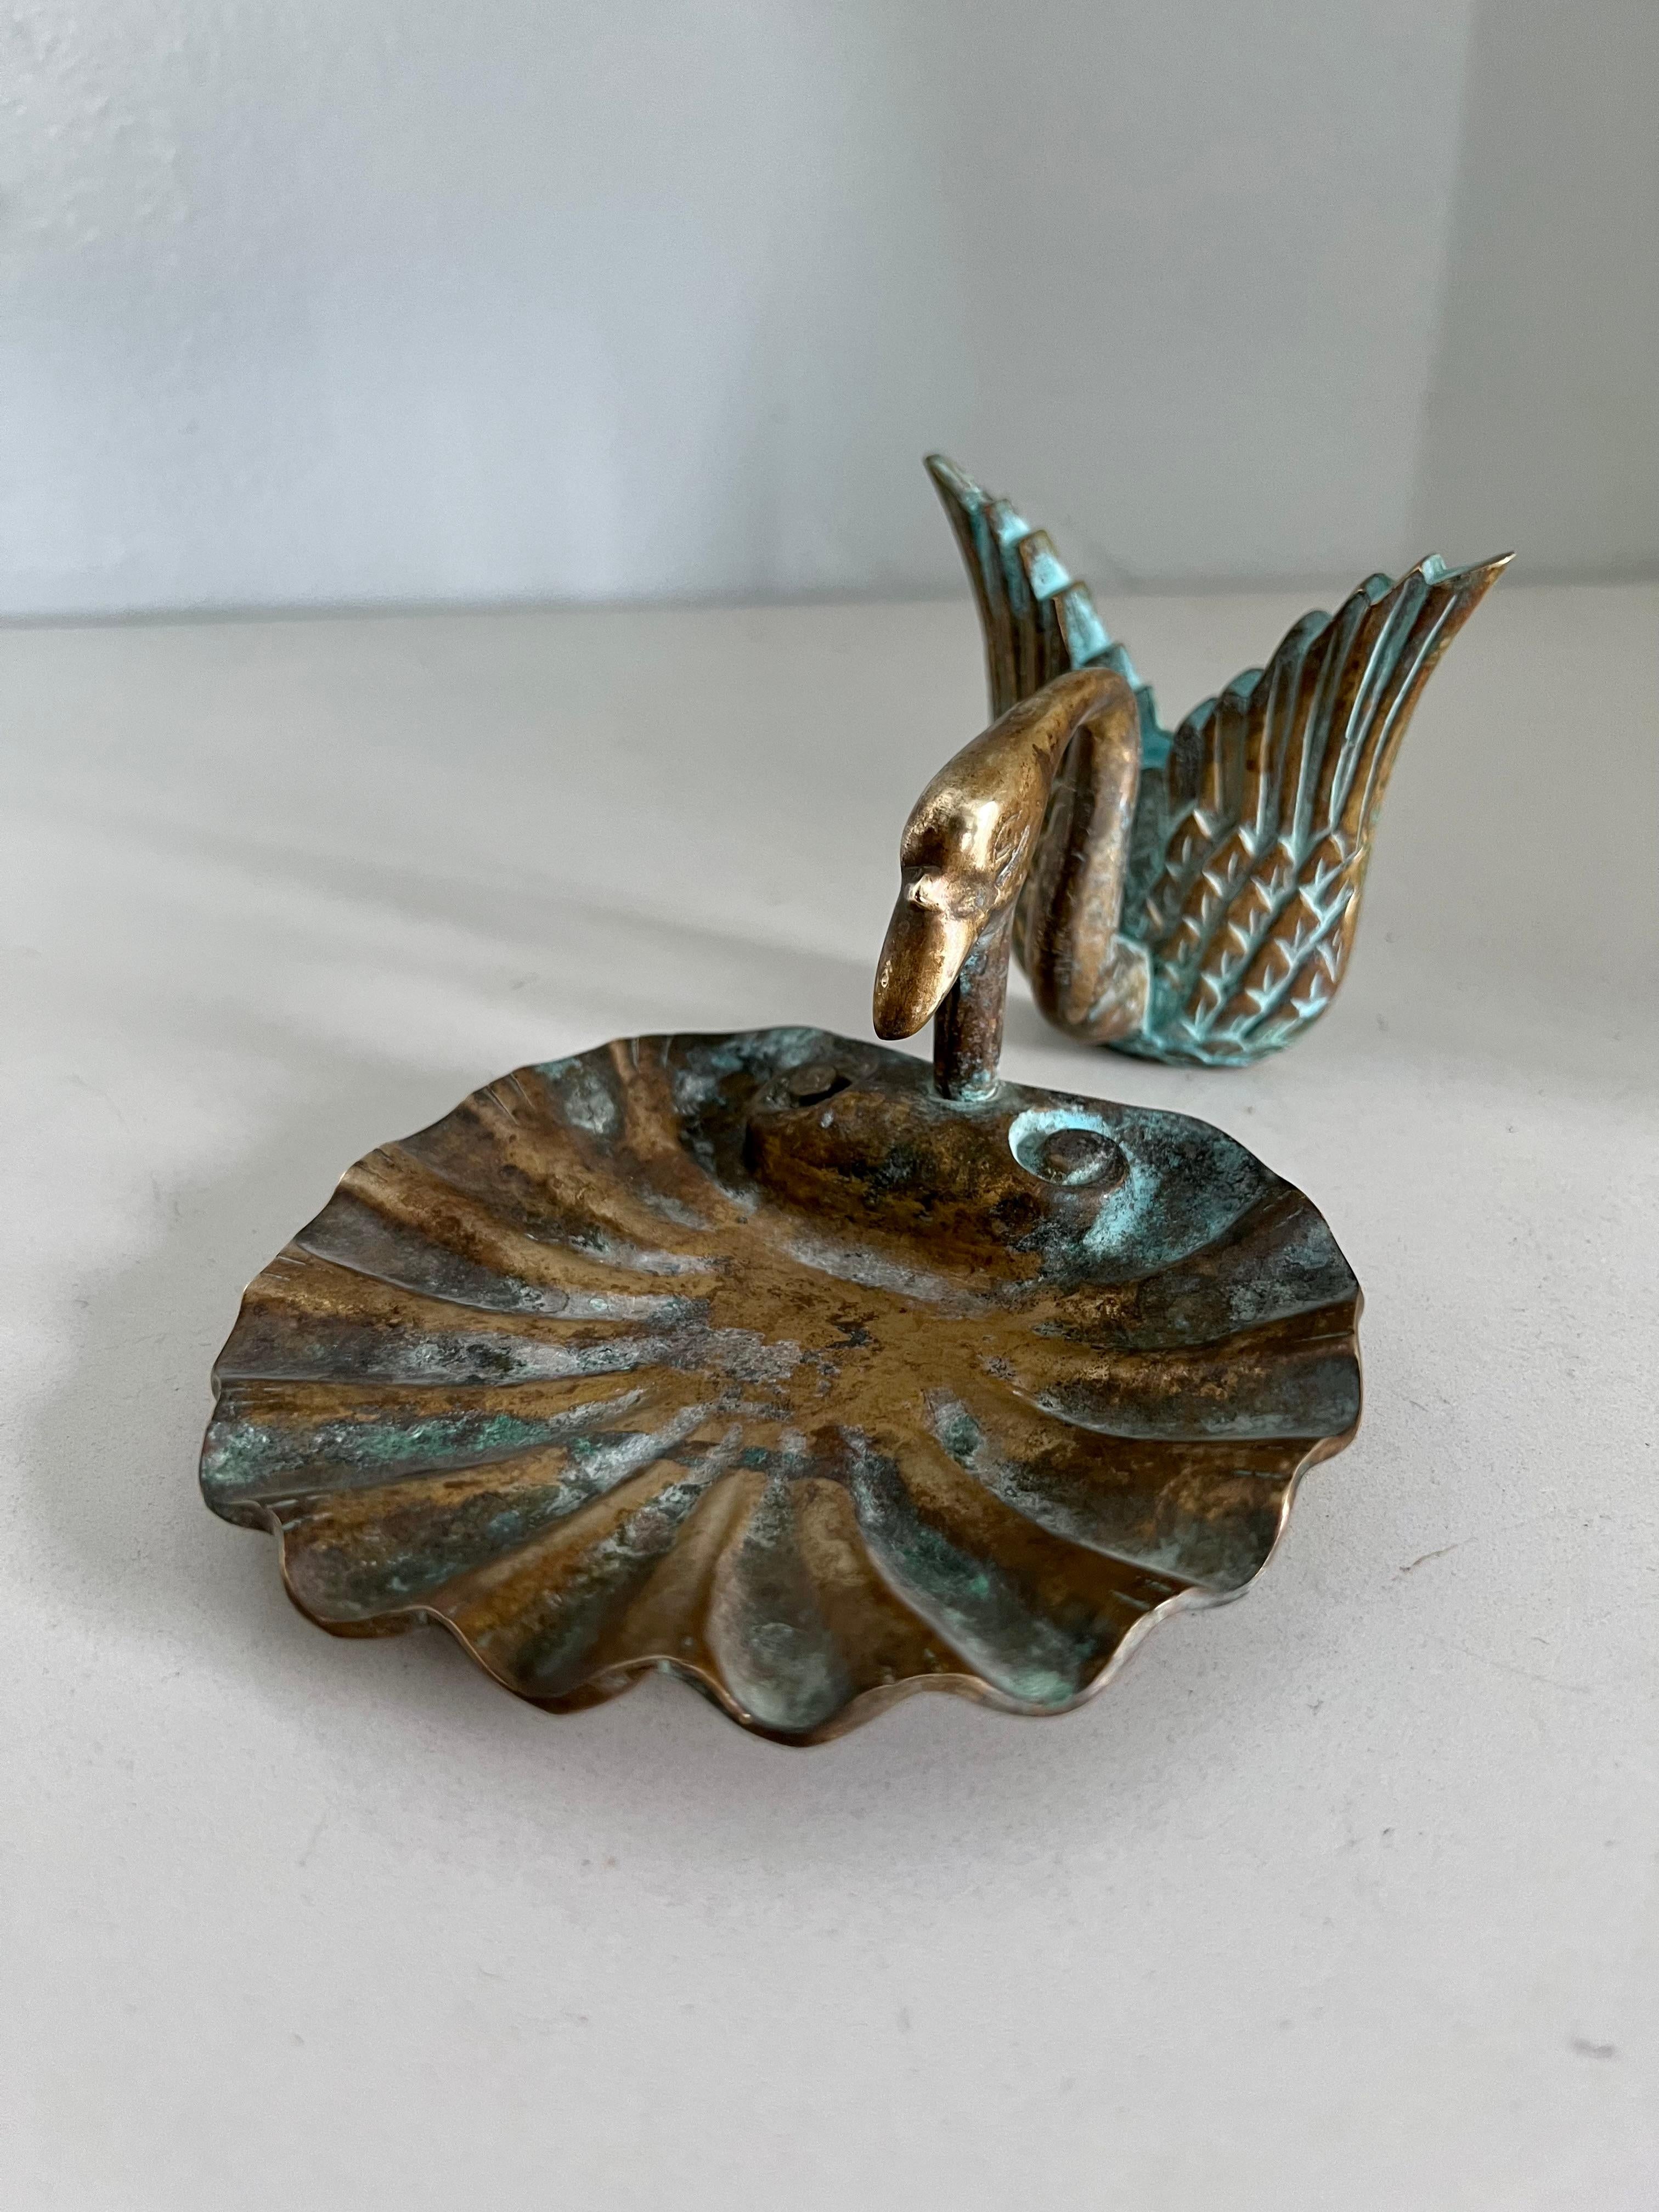 A wonderful brass or bronze soap dish of a swan or goose with a shell shaped holder. The piece represents the mid century or earlier and is a compliment to bathrooms or work areas for a bar of soap, or even on a desk to hold supplies. 

The piece